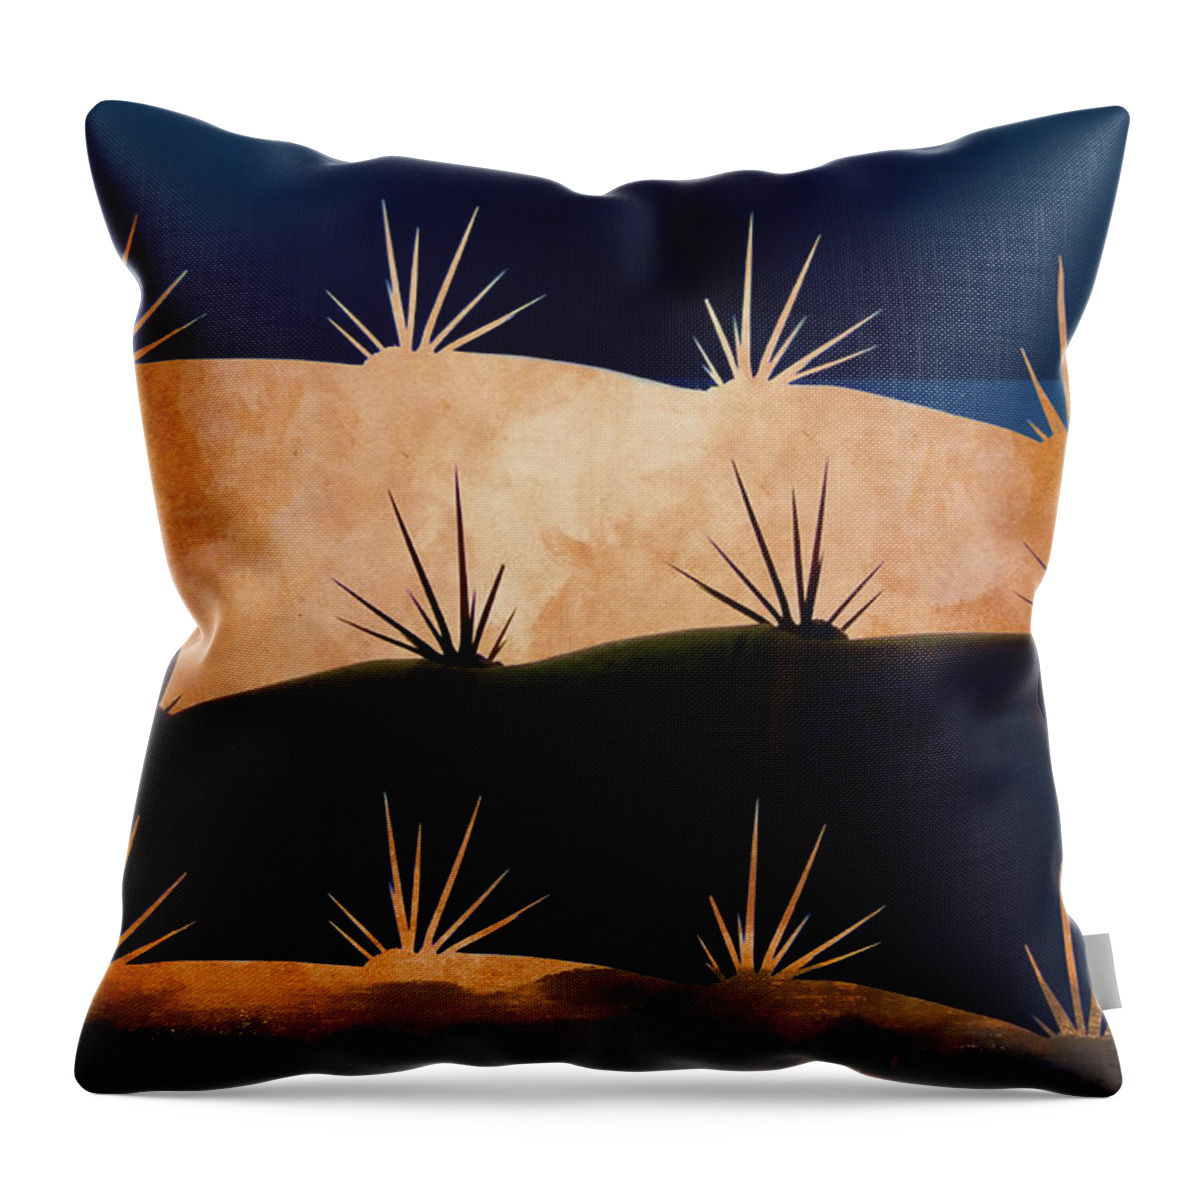 Baja Throw Pillow featuring the photograph Baja Landscape Number 1 by Carol Leigh